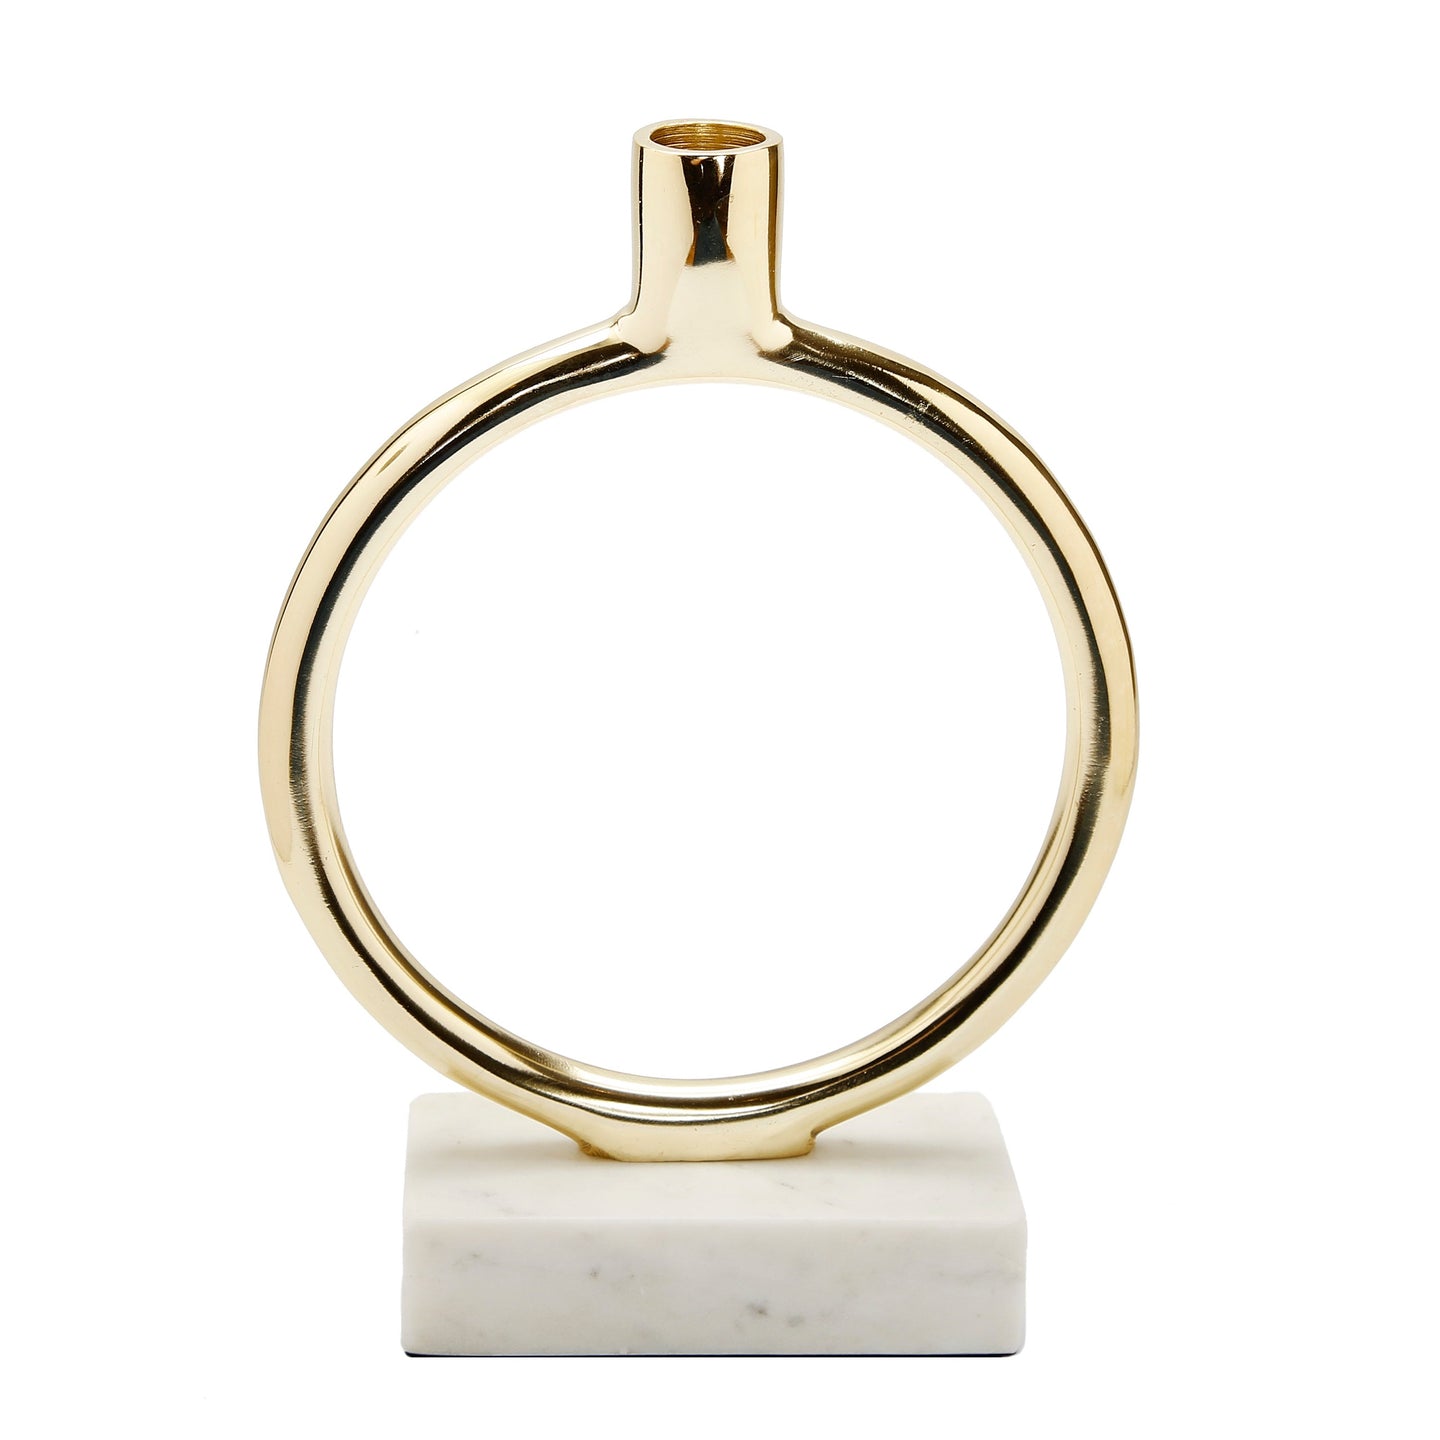 Gold Circular Taper Candle Holder on Marble Base - 9.75